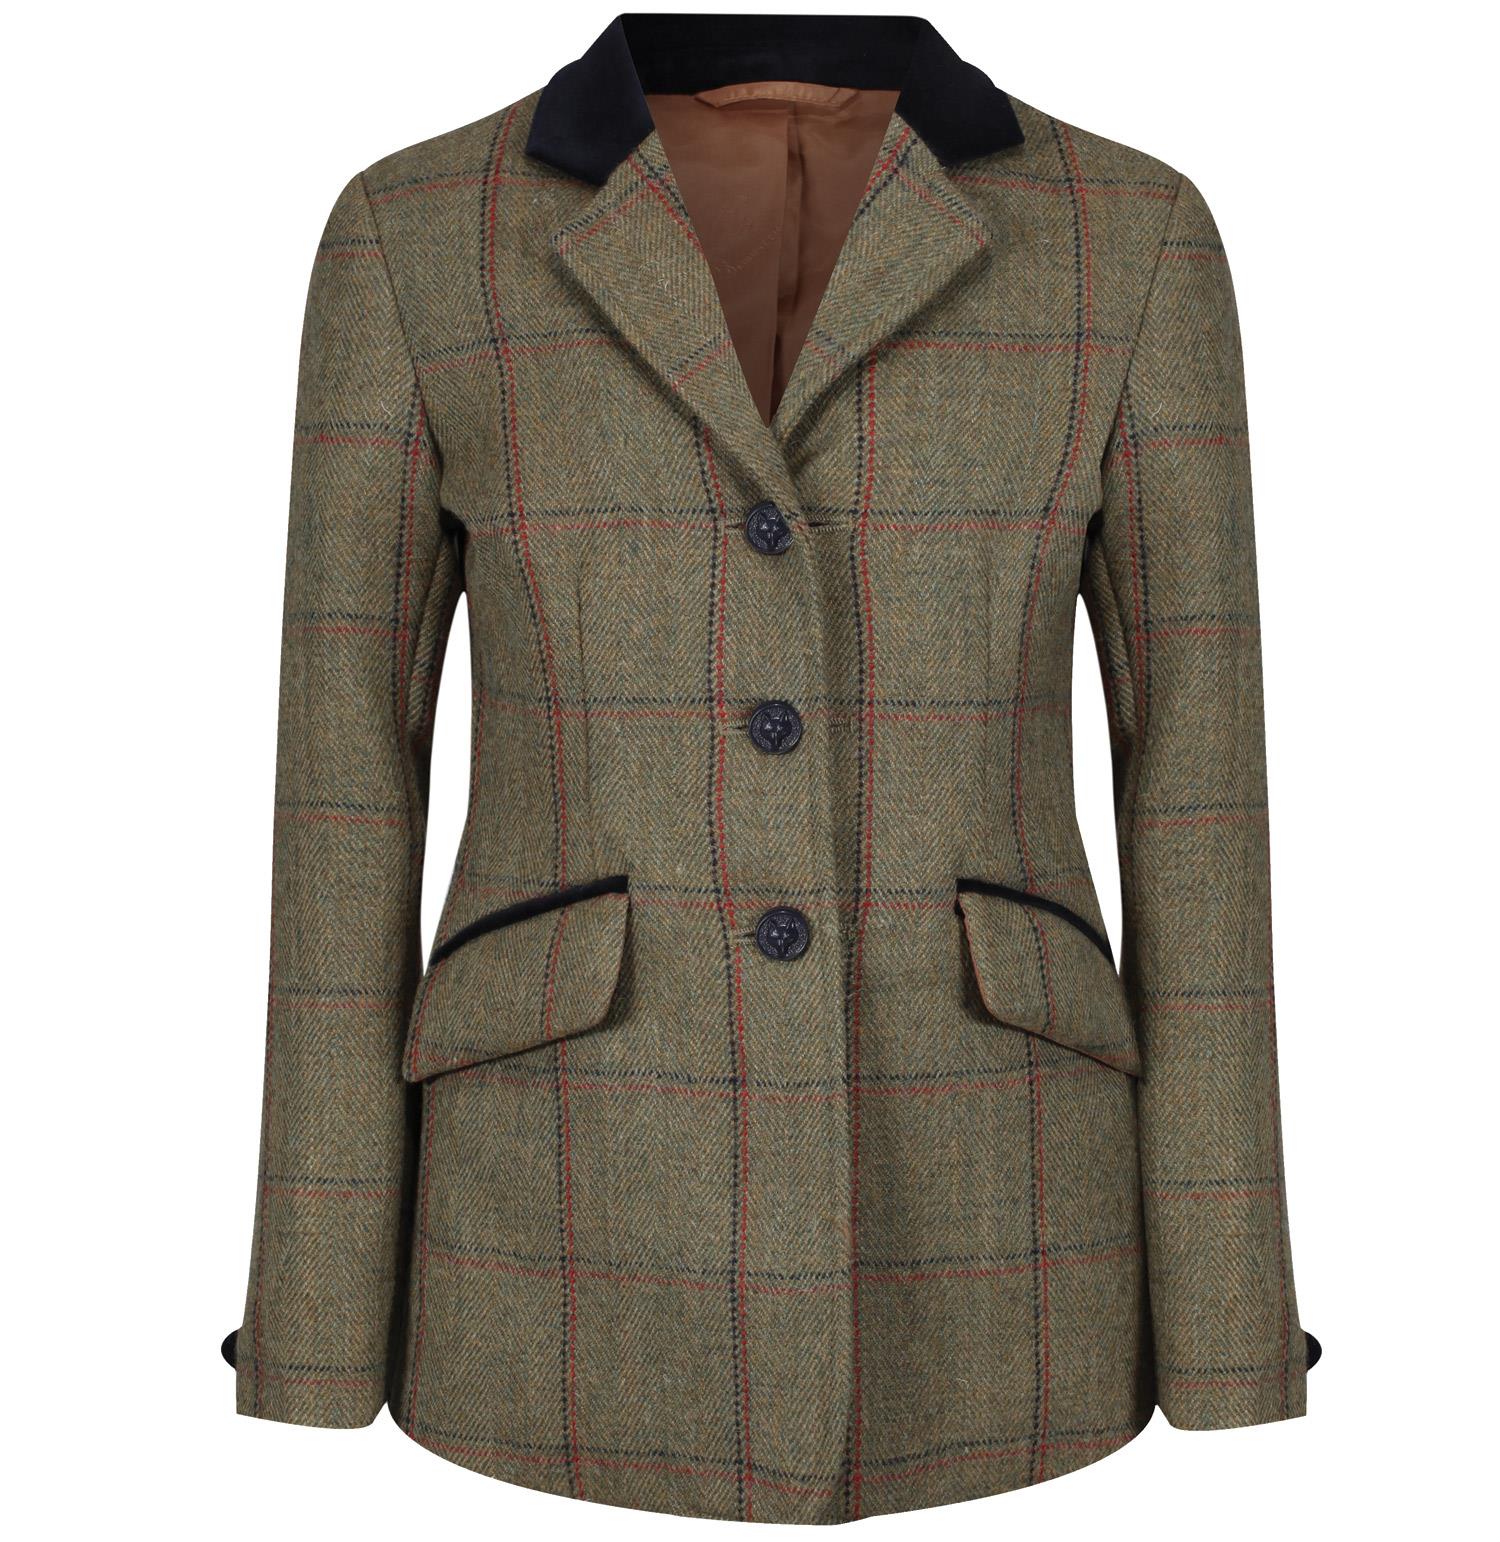 Equetech Maids Launton Deluxe Tweed Riding Jacket - Just Horse Riders